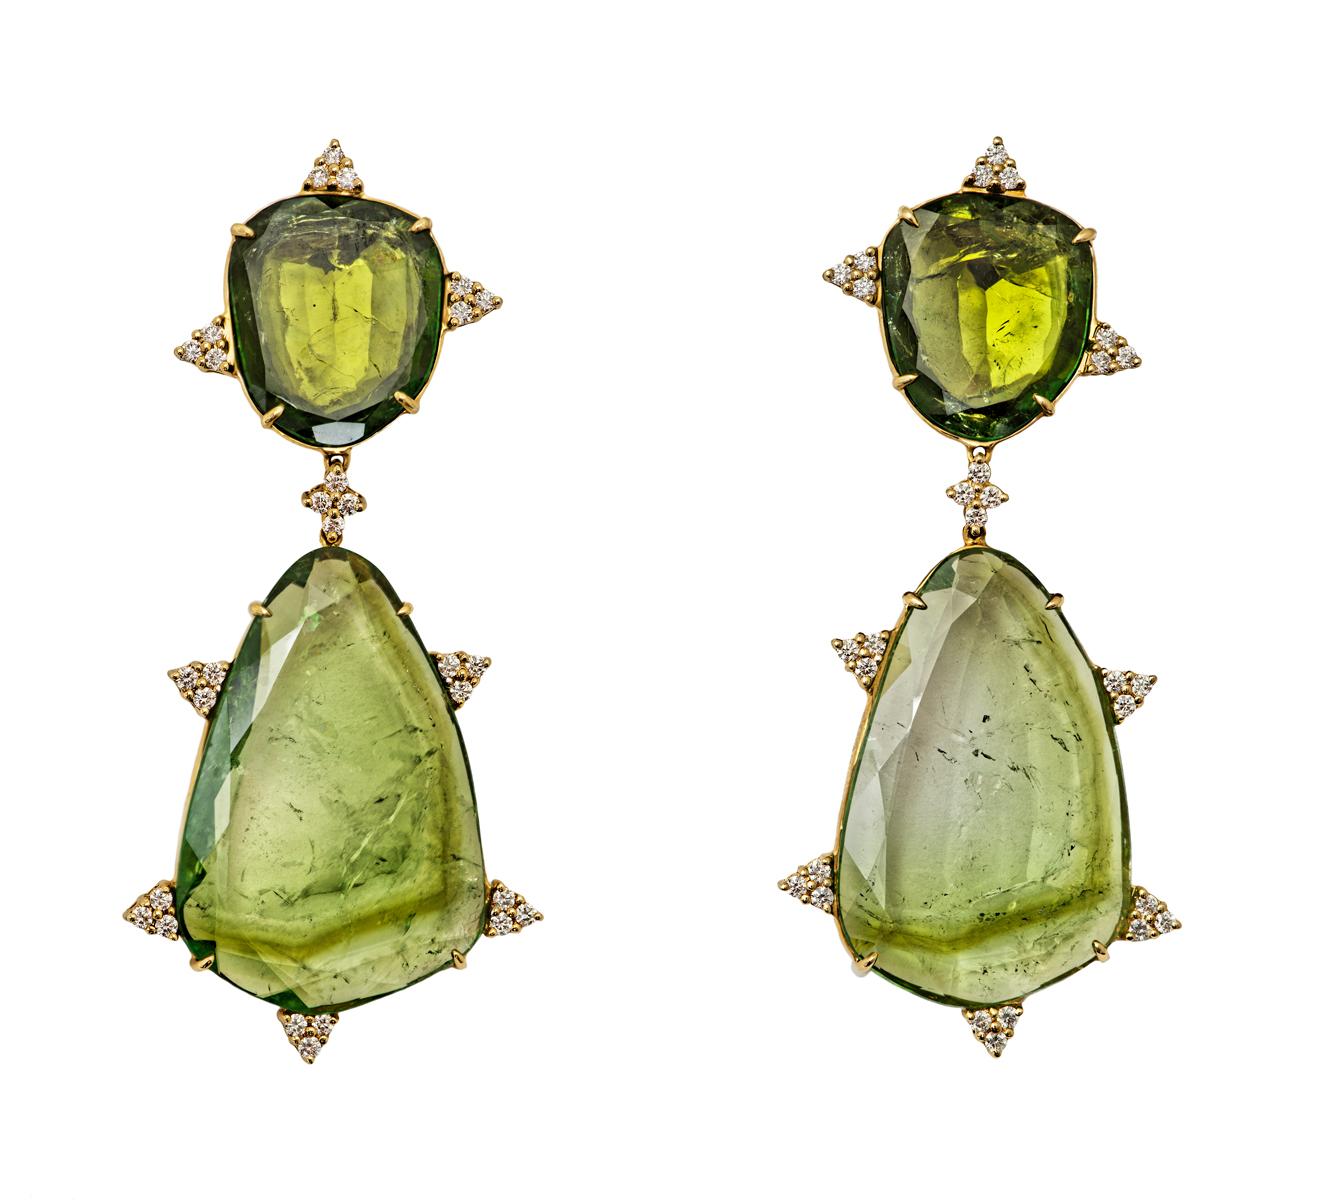 Pair of mint tourmaline slice earrings, accented with circular-cut diamond trefoil motifs, mounted in 18K gold.

Description:
Gem Material Details: The mint tourmaline slices are all Brazilian in origin and together weigh approximately 106.83 cts.